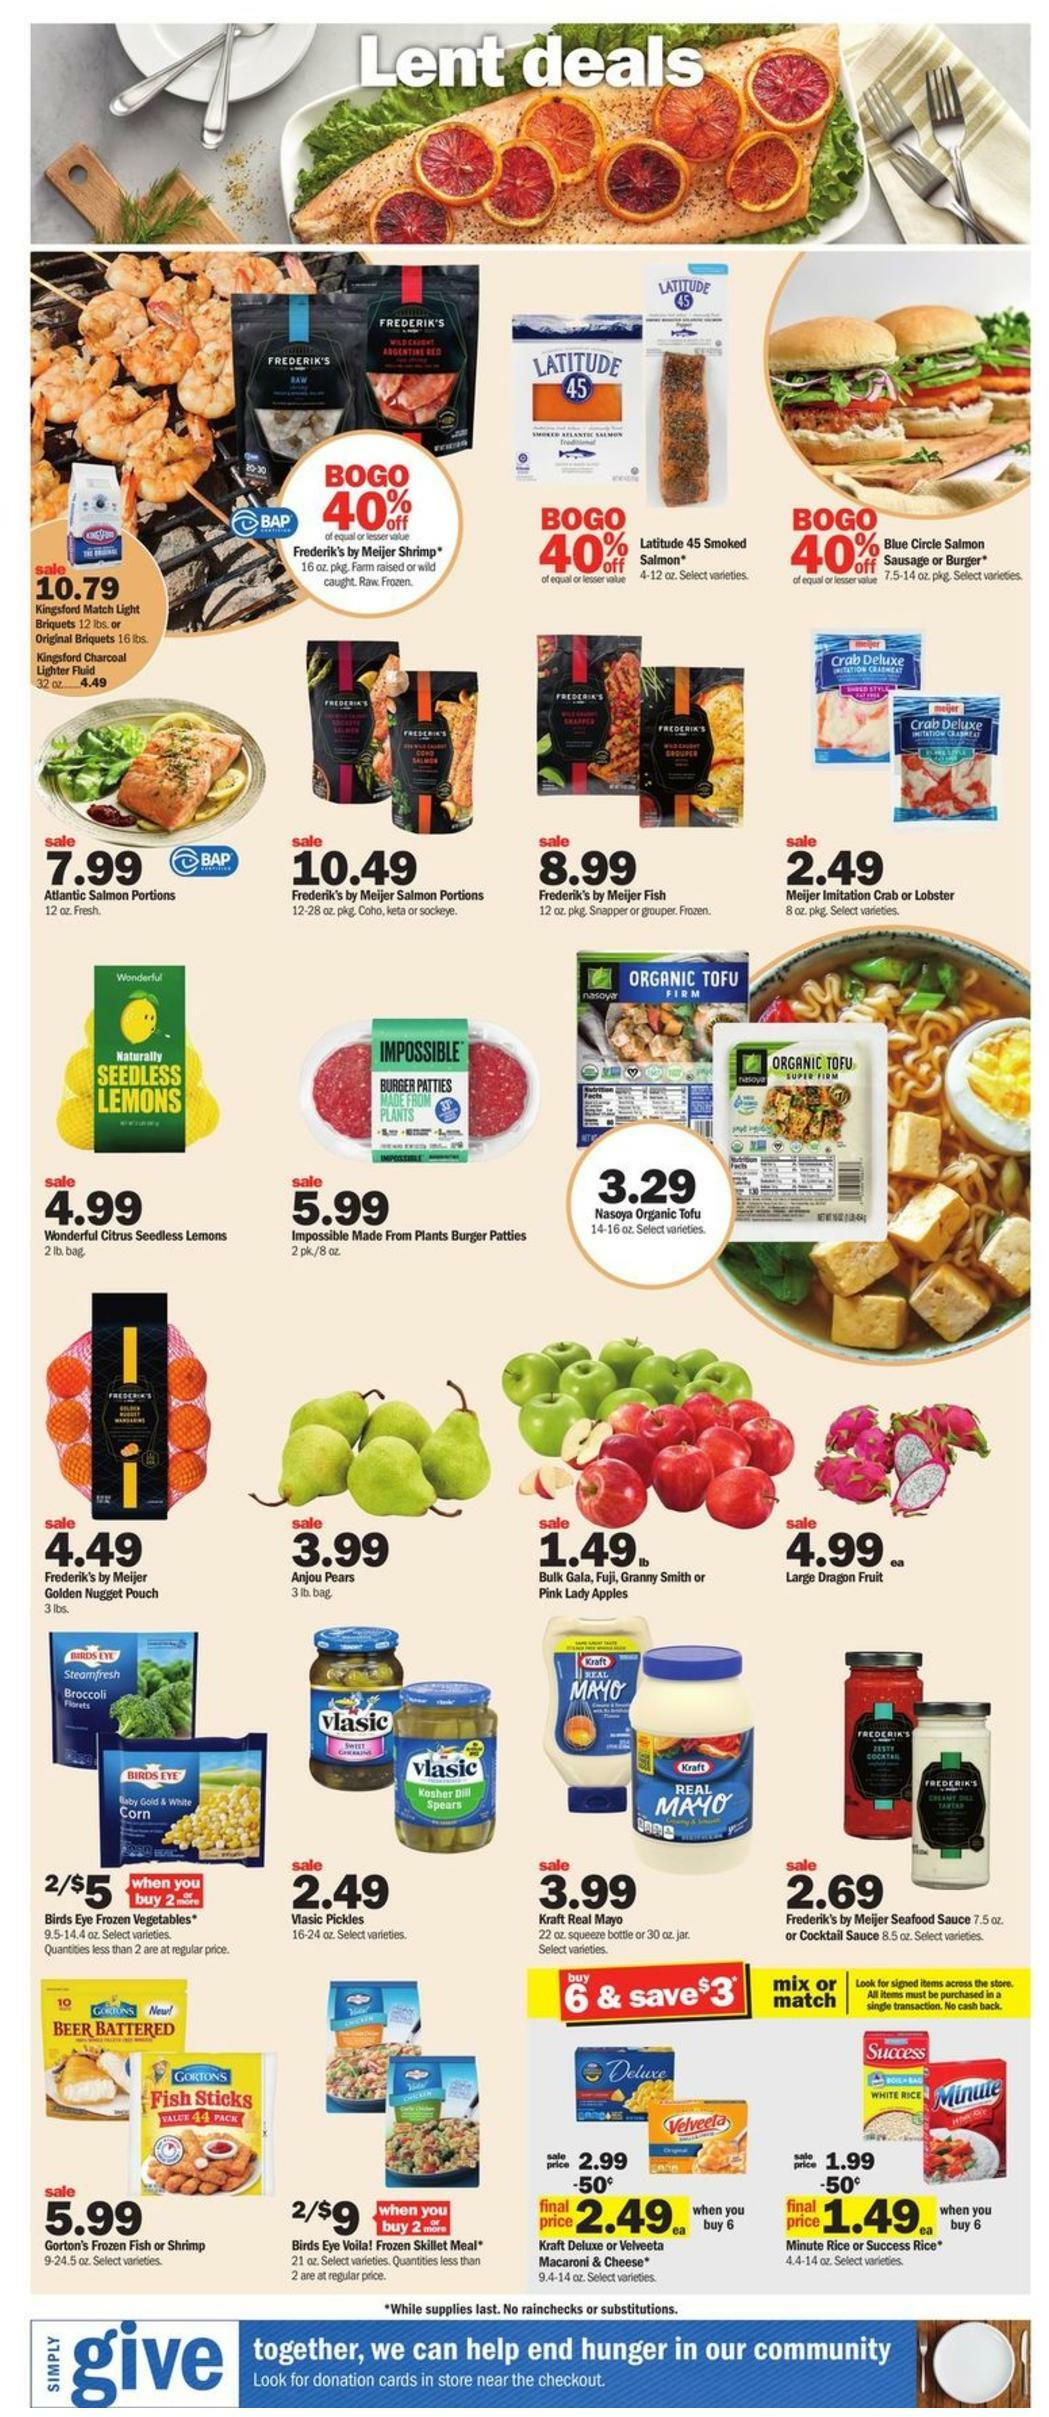 Meijer Weekly Ad from February 26